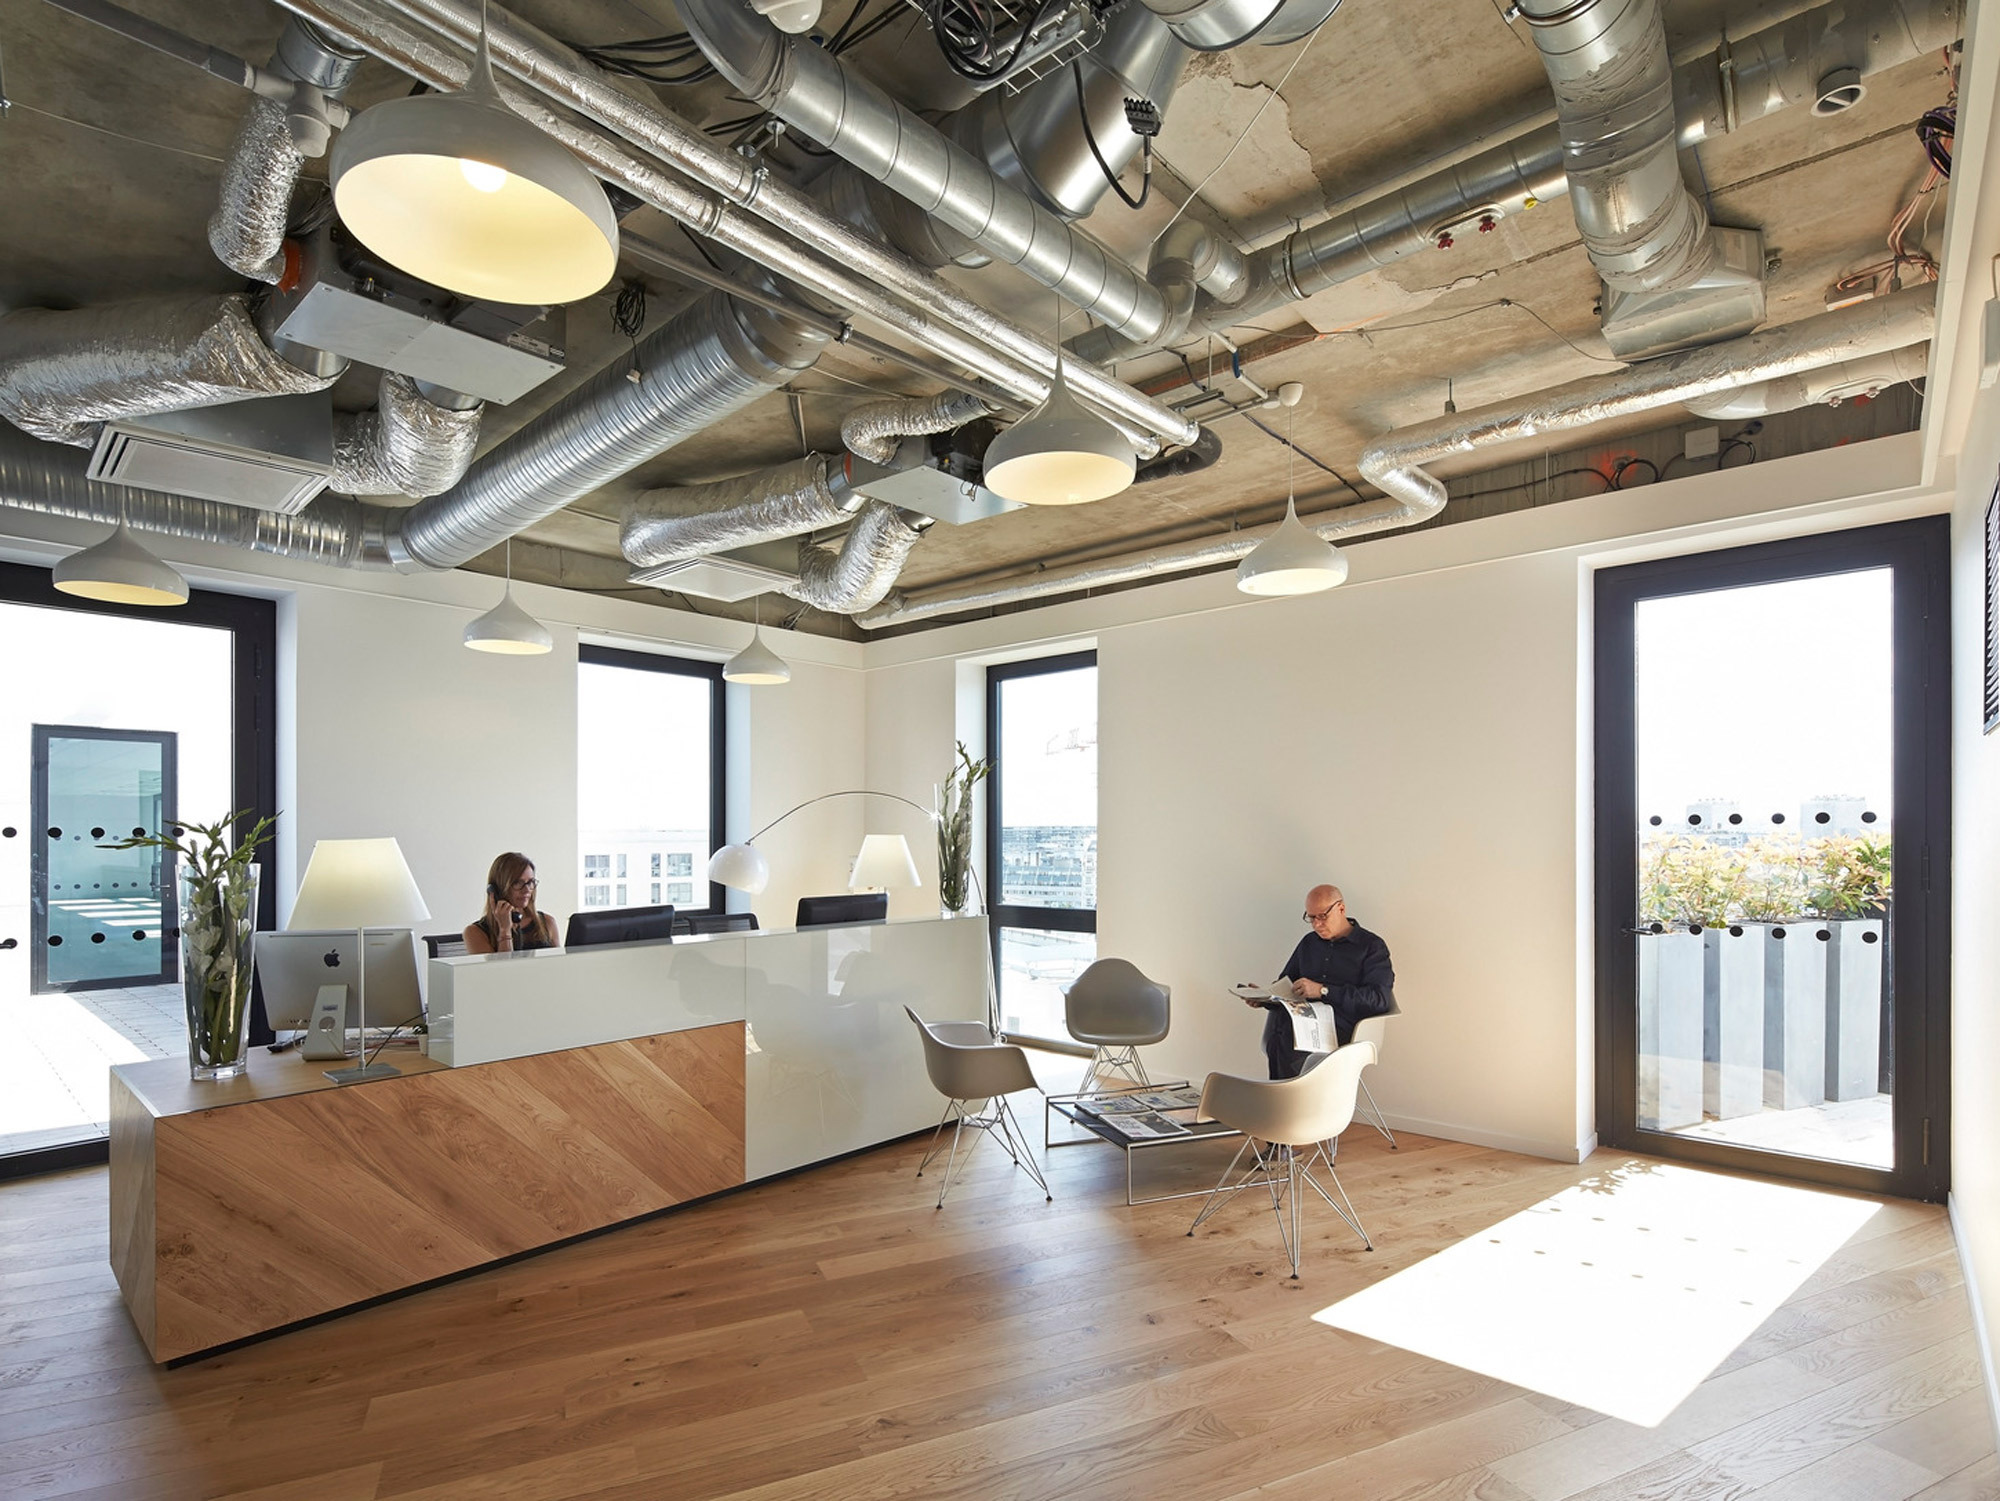 Modern office space featuring exposed ductwork and natural lighting. Varied seating, including ergonomic chairs and lounge areas, complements the light wood floors and white walls, conveying an open, airy atmosphere.